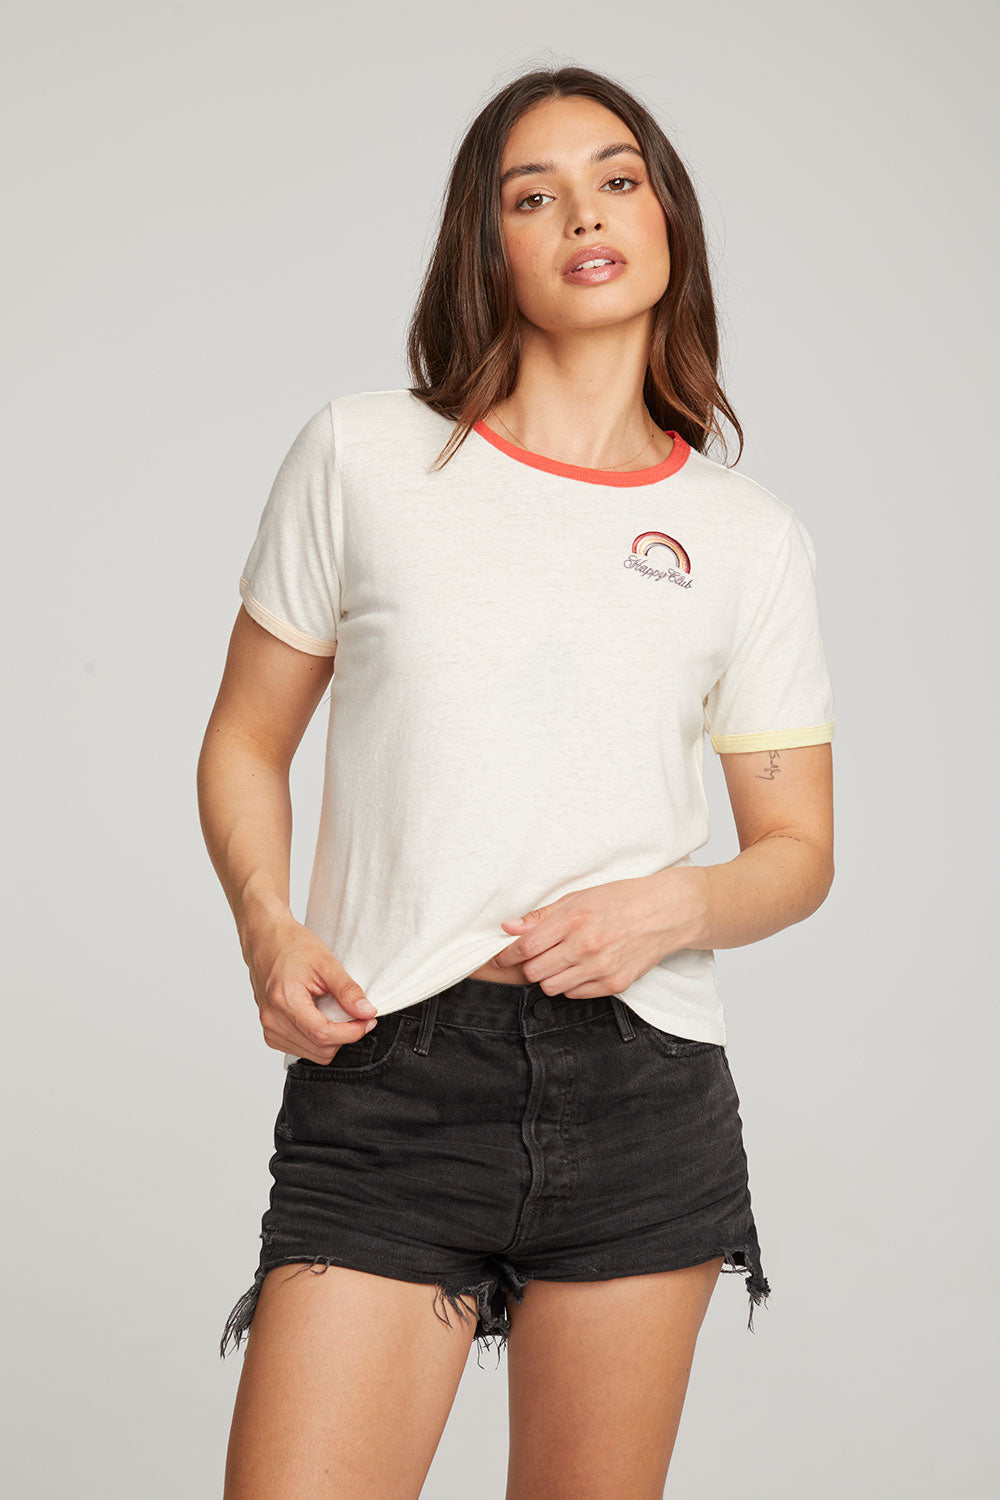 Happy Club Tee WOMENS chaserbrand